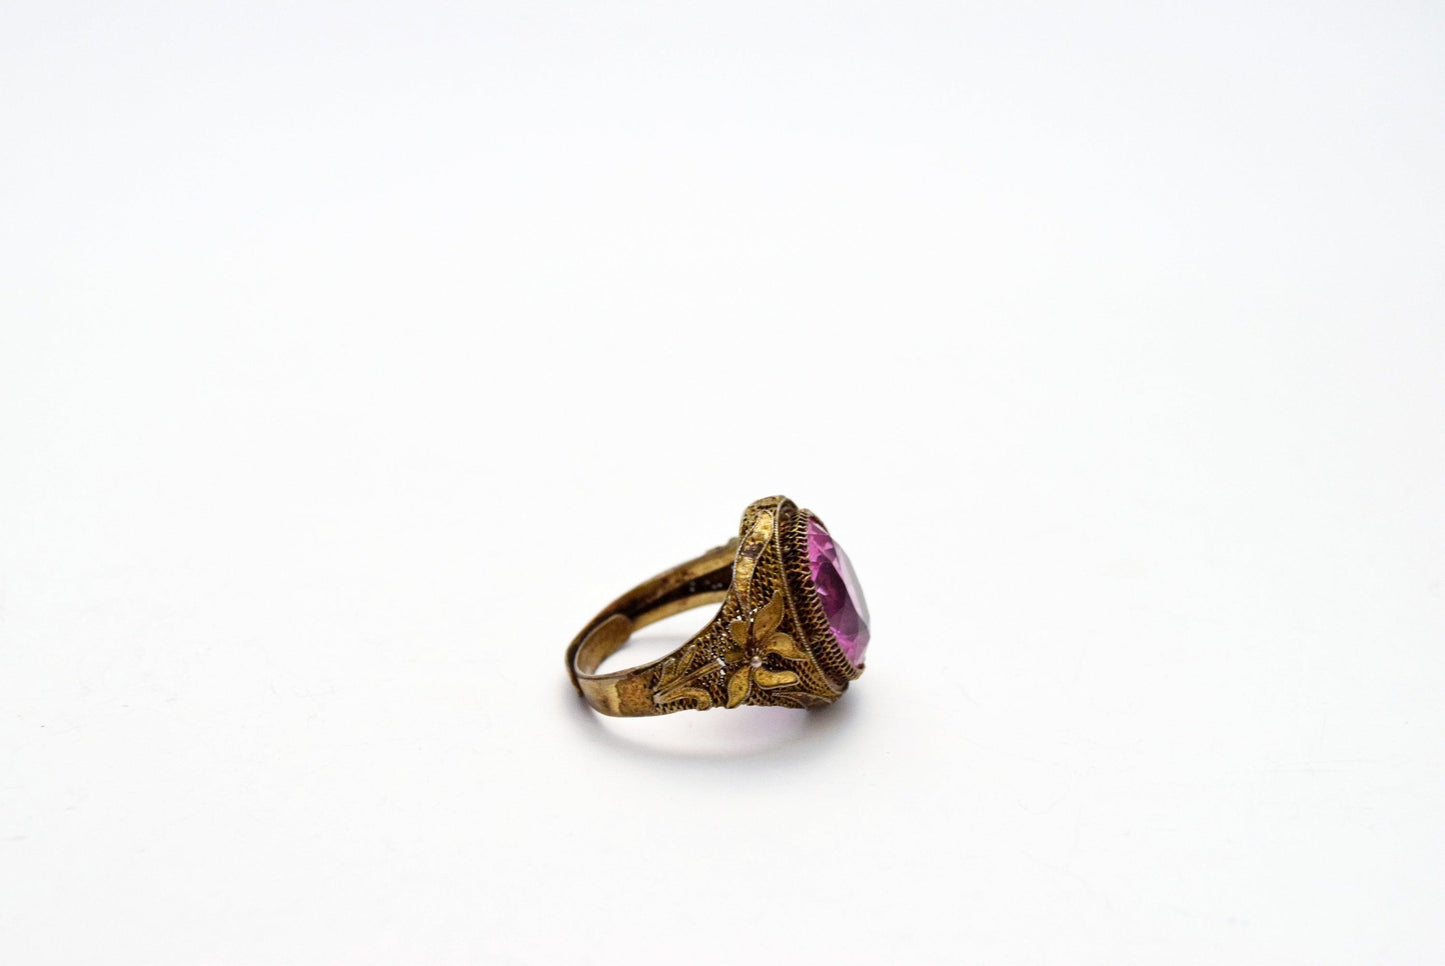 Chinese Export Ring with Purple Oval Cabochon - Anteeka